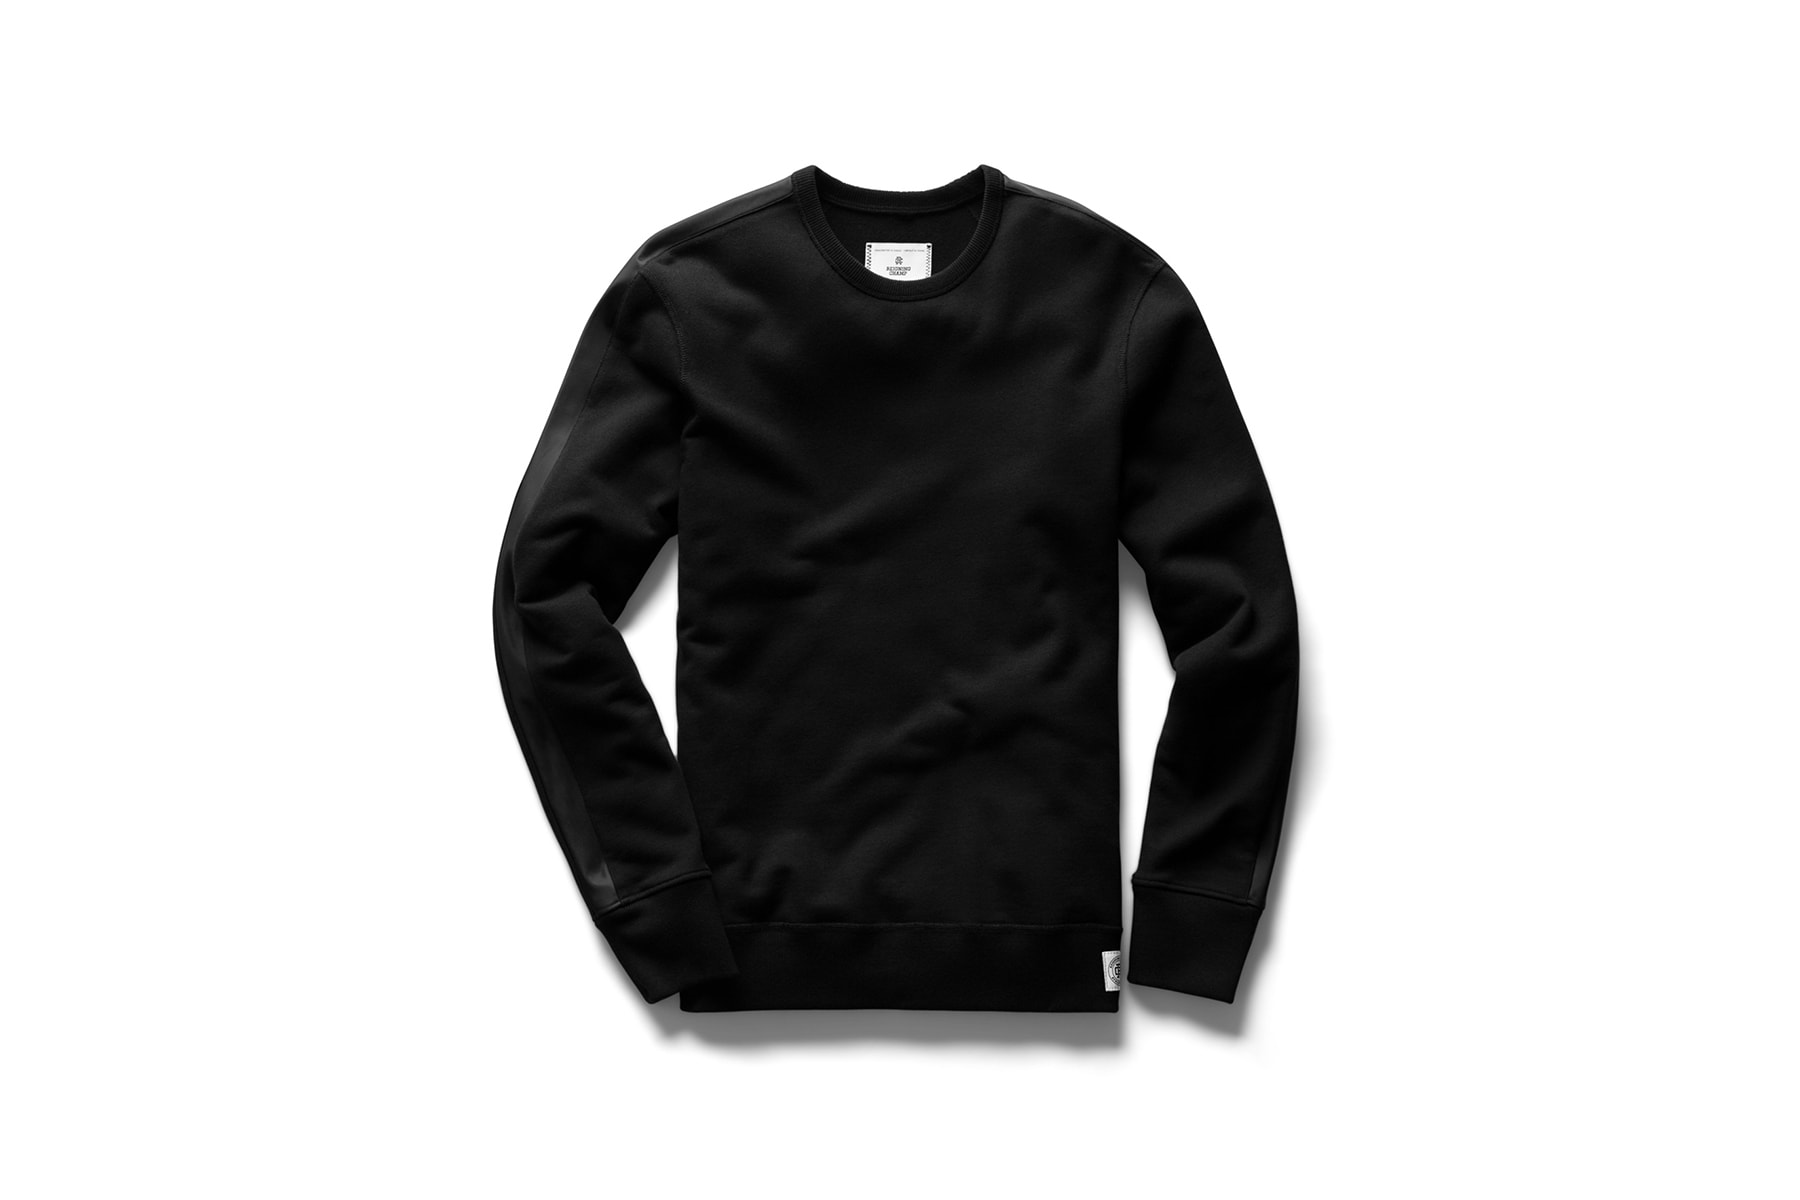 muhammad ali cassius clay reigning champ collaboration august 2 2018 long sleeve sweater black